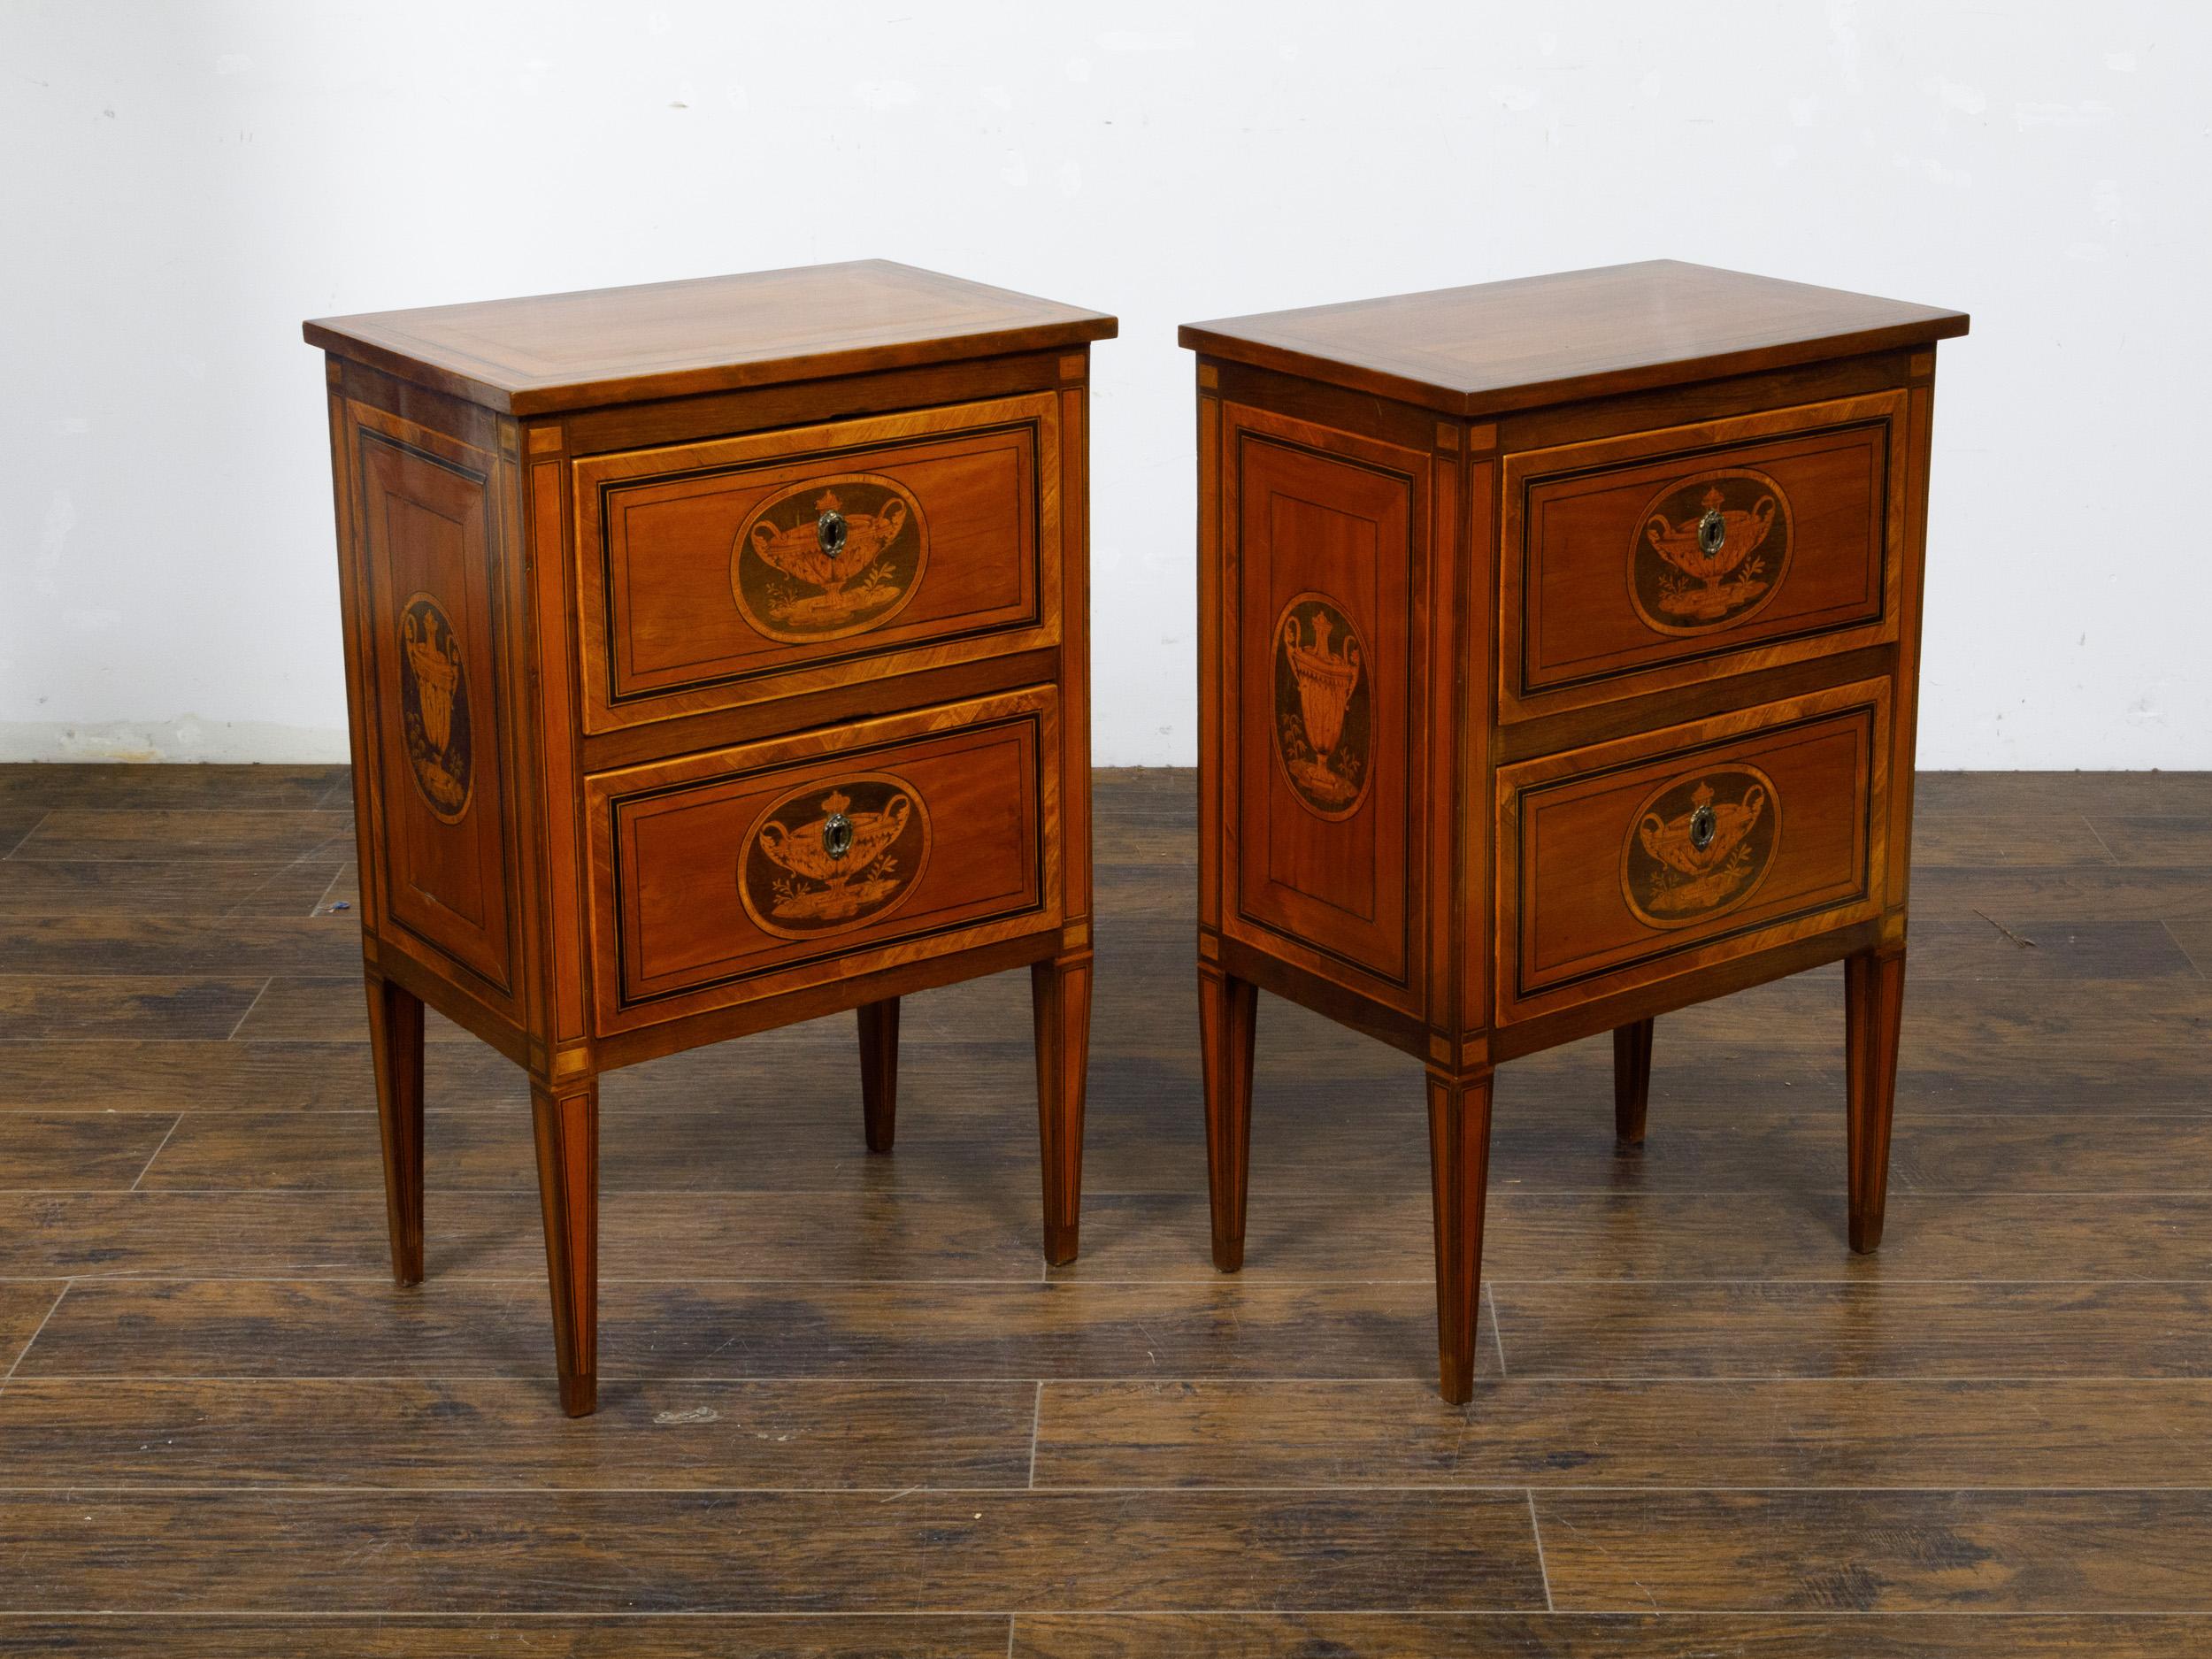 Pair of Italian Neoclassical 1800s Walnut Bedside Tables with Marquetry Décor For Sale 1